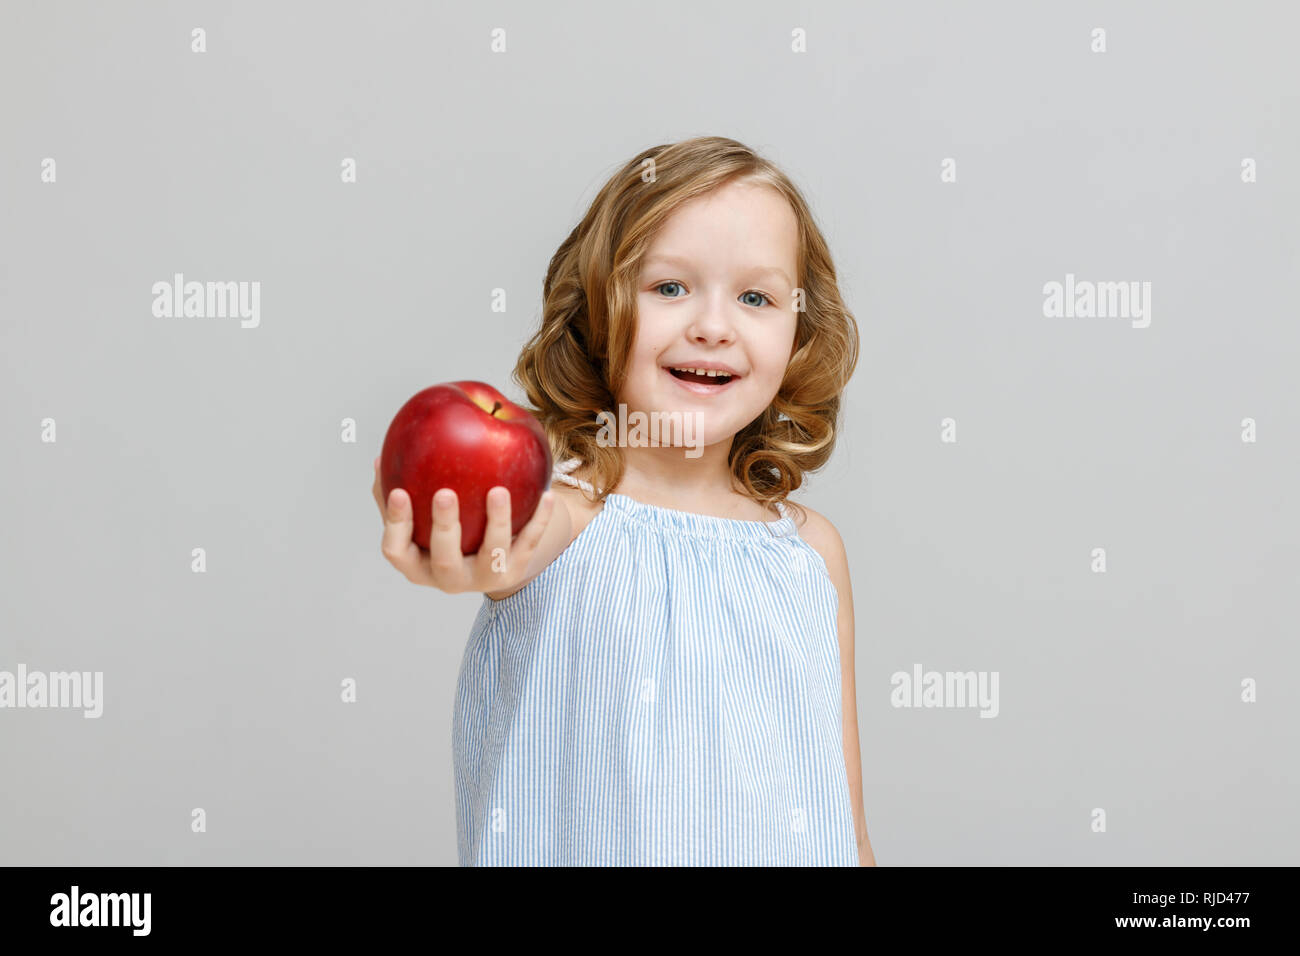 Portrait of a happy smiling little blonde girl on a gray background. A child holds out a red apple Stock Photo